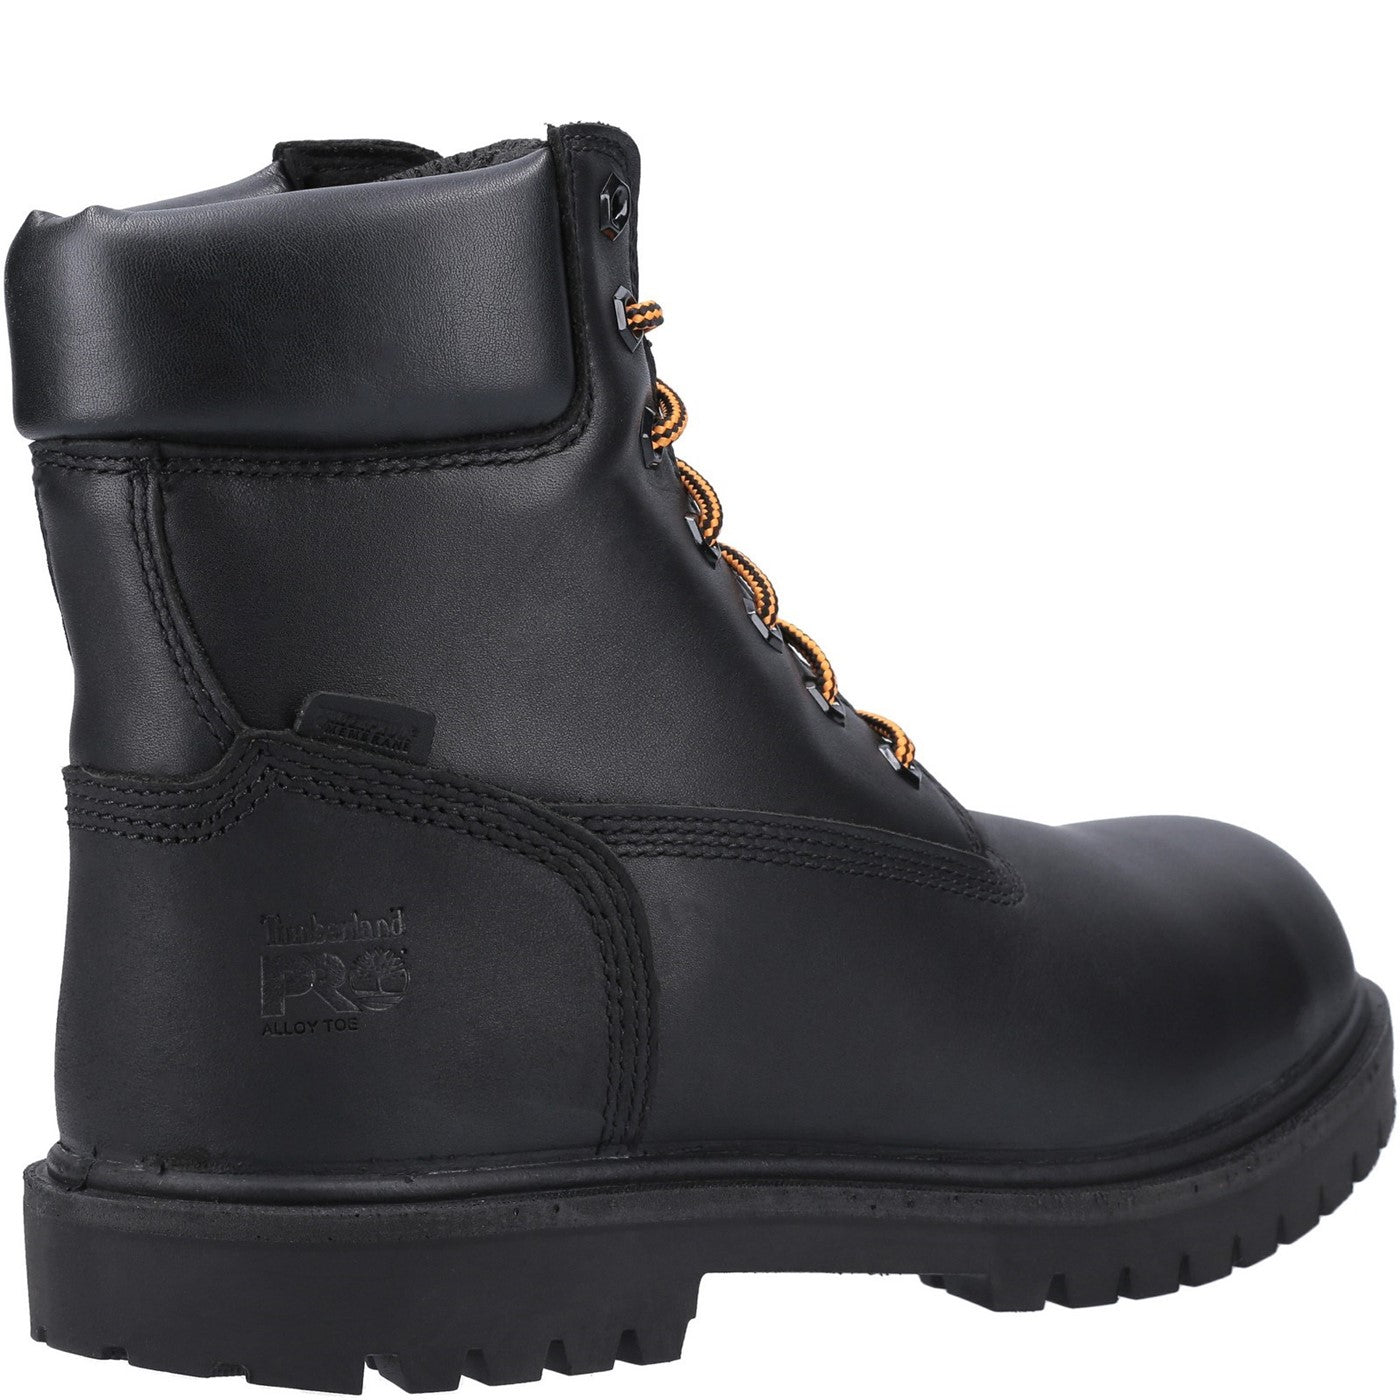 Men's Timberland Pro Iconic Safety Toe Work Boot